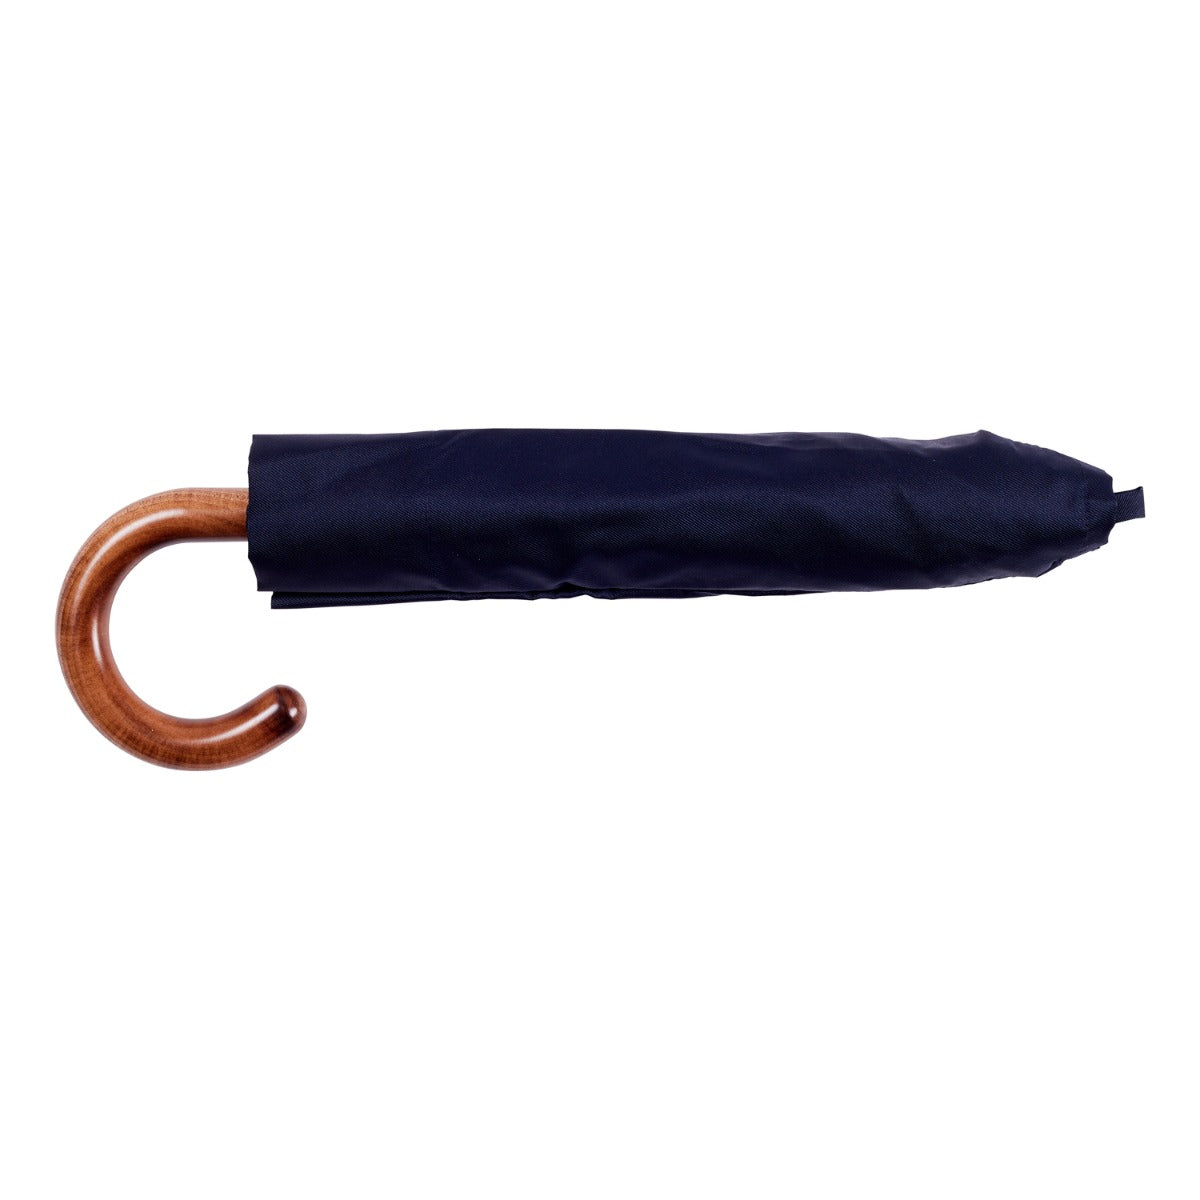 A KirbyAllison.com Navy Travel Umbrella with Maple Handle on a white background.